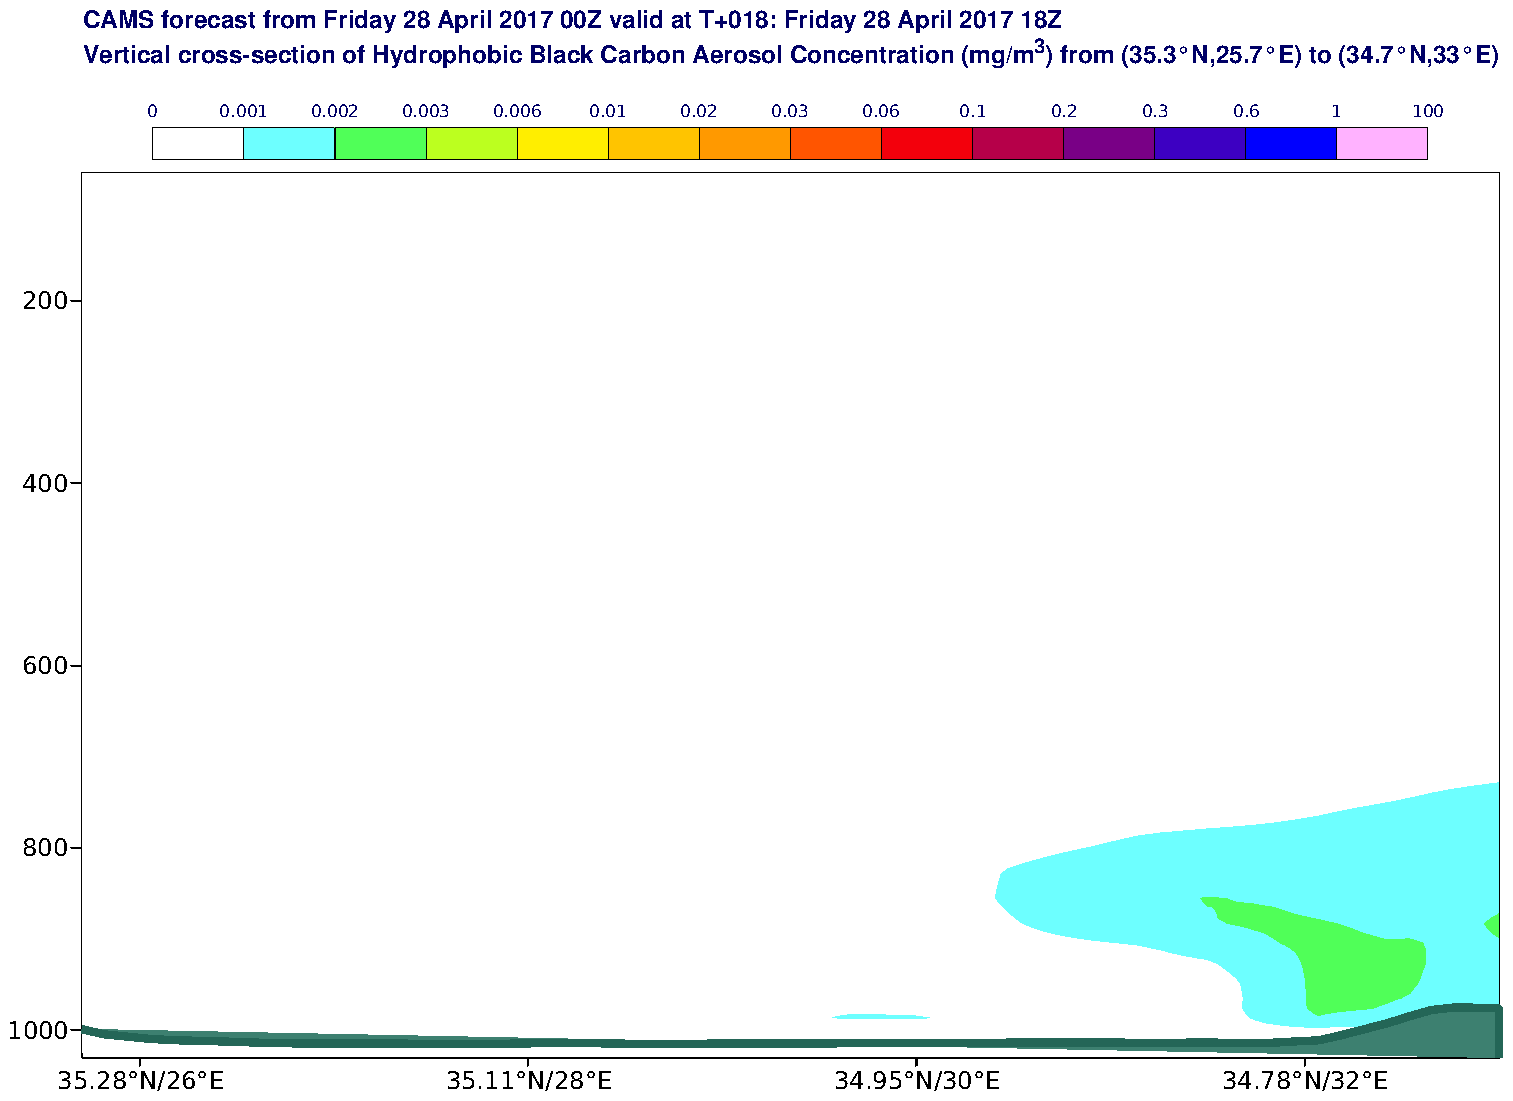 Vertical cross-section of Hydrophobic Black Carbon Aerosol Concentration (mg/m3) valid at T18 - 2017-04-28 18:00